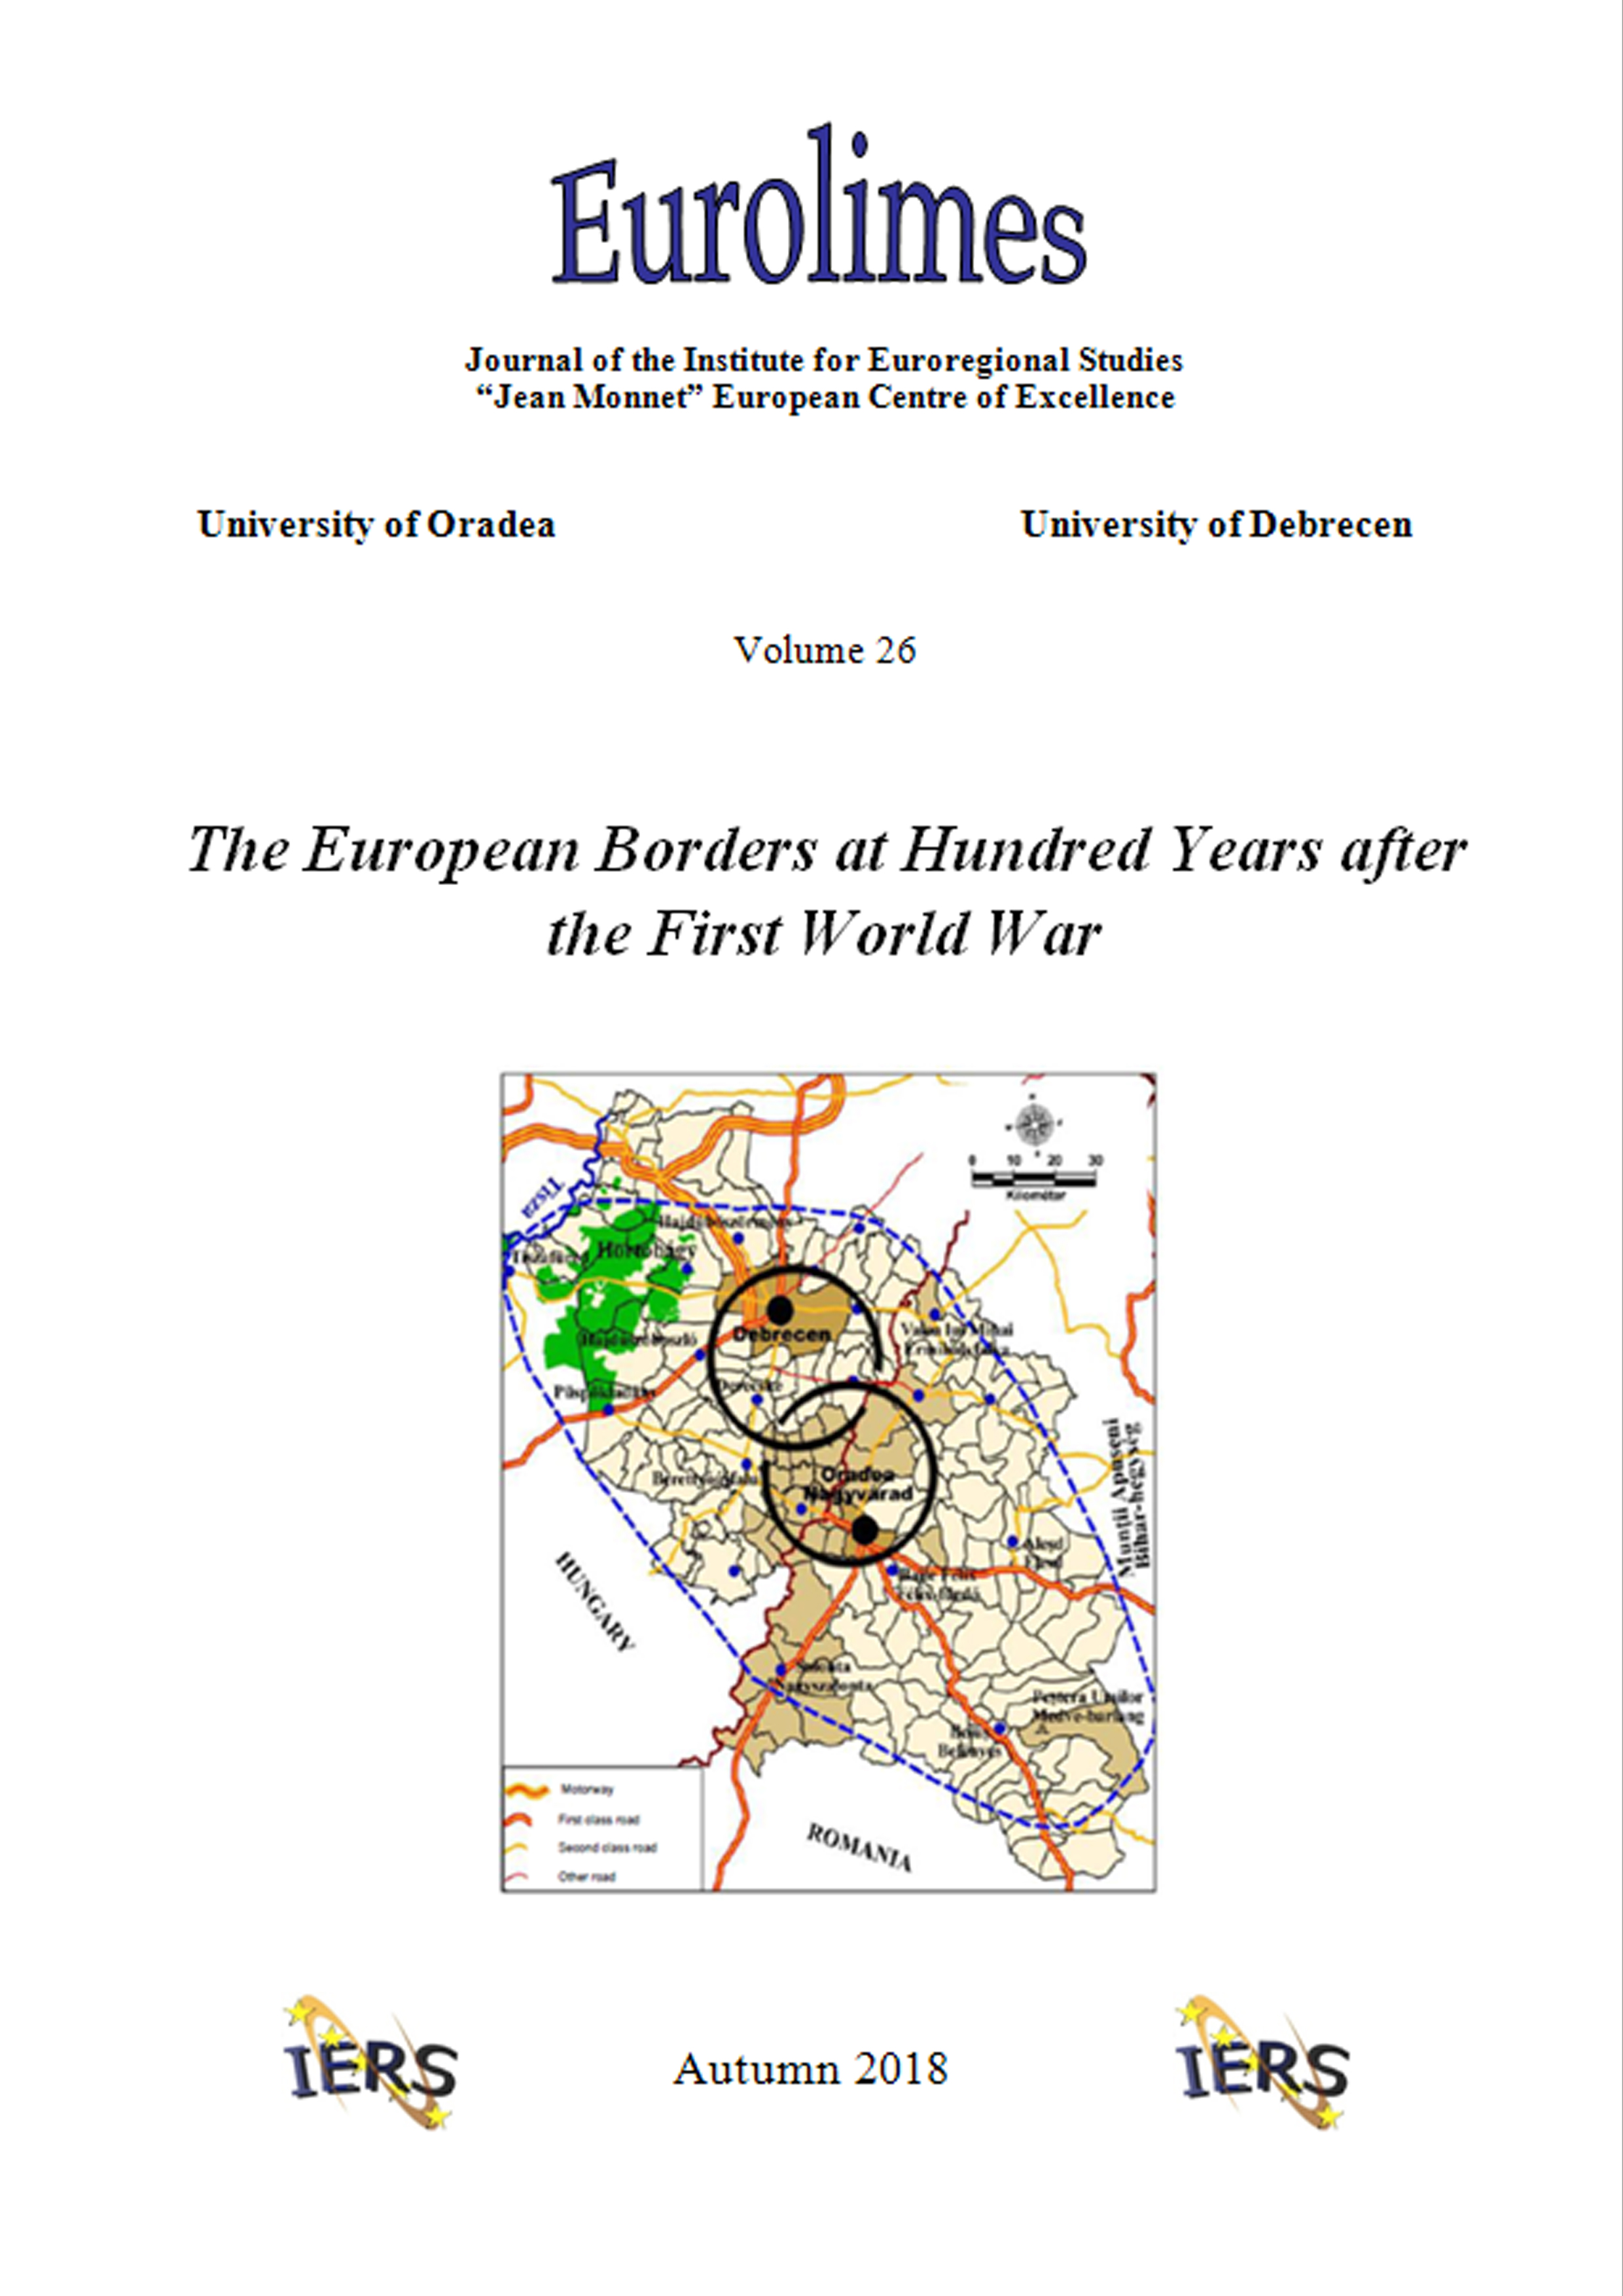 How the Security Dimension Triggered the Modifications of the European/EU Borders and what were the Subsequent Consequences? An ex post 100 years Perspective